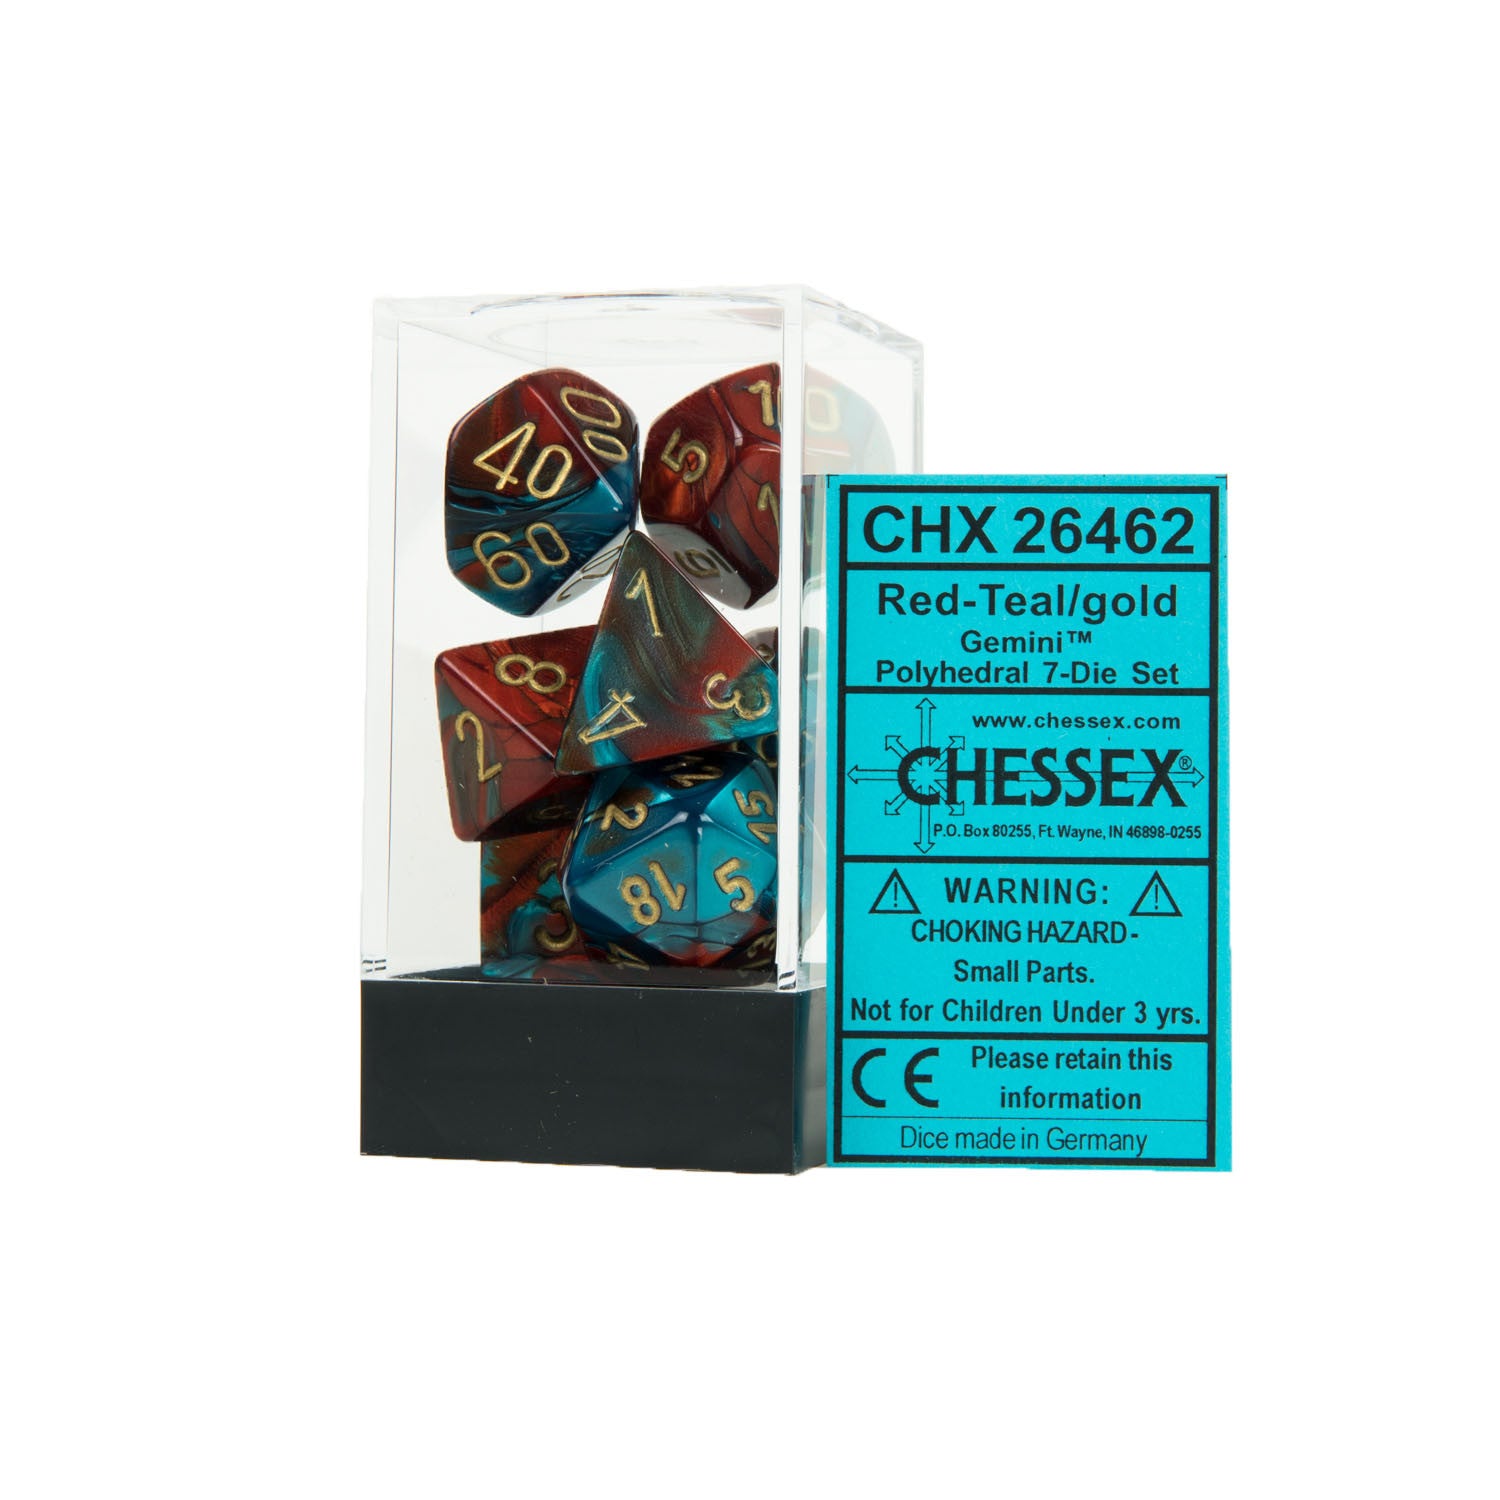 Chessex CHX26462 Red-Teal w/gold Gemini™ Polyhedral Dice Set